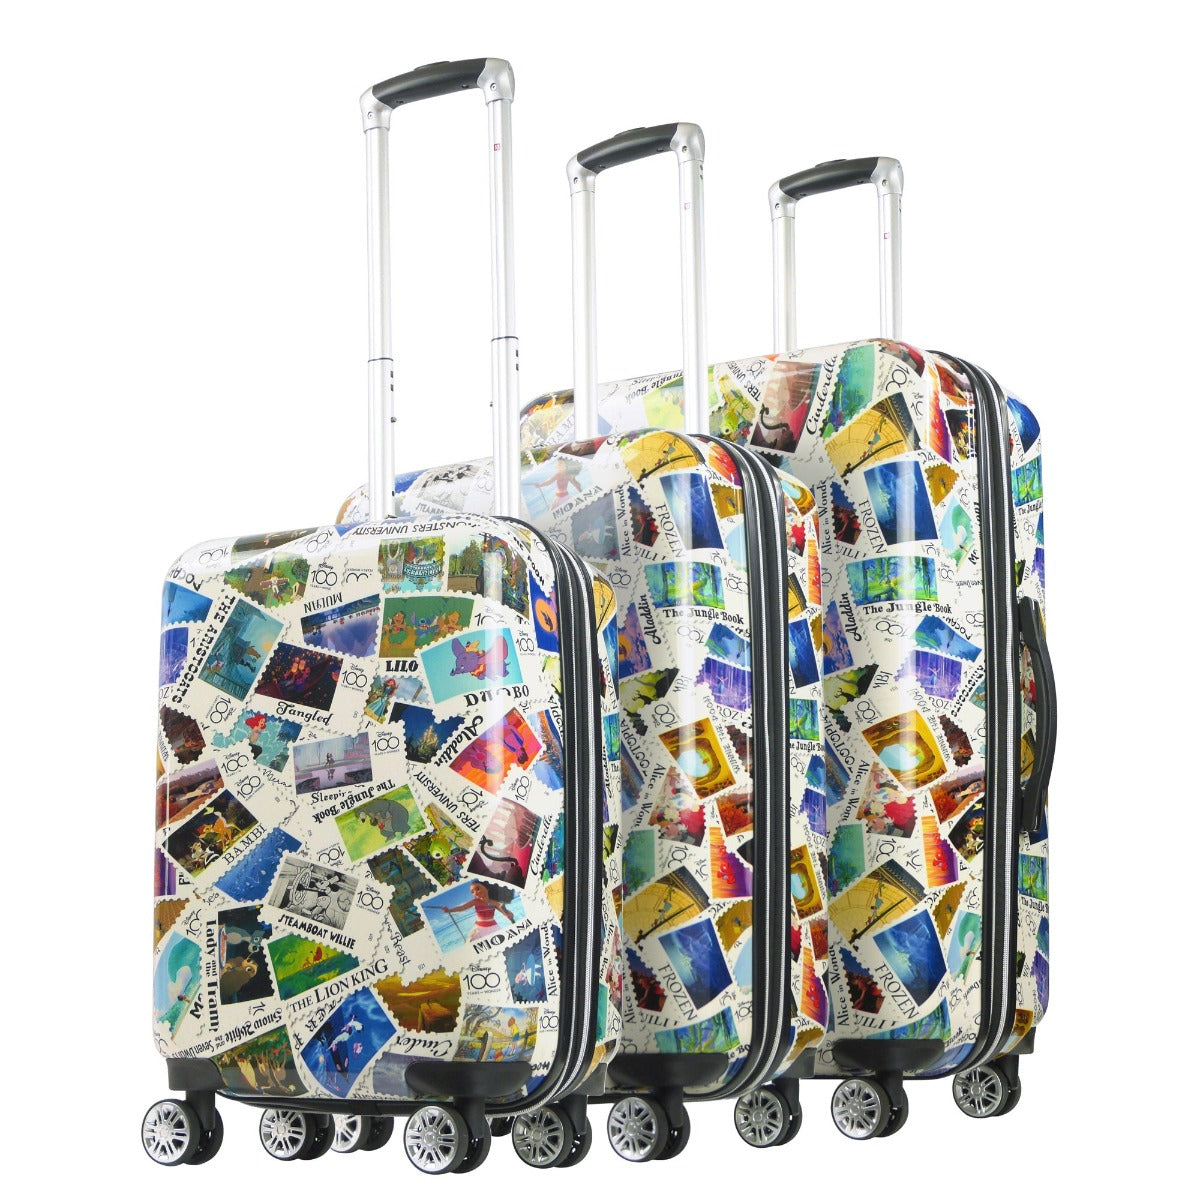 Ful Disney 100 Years Anniversary Stamps limited edition hard-sided 3 piece spinner luggage set